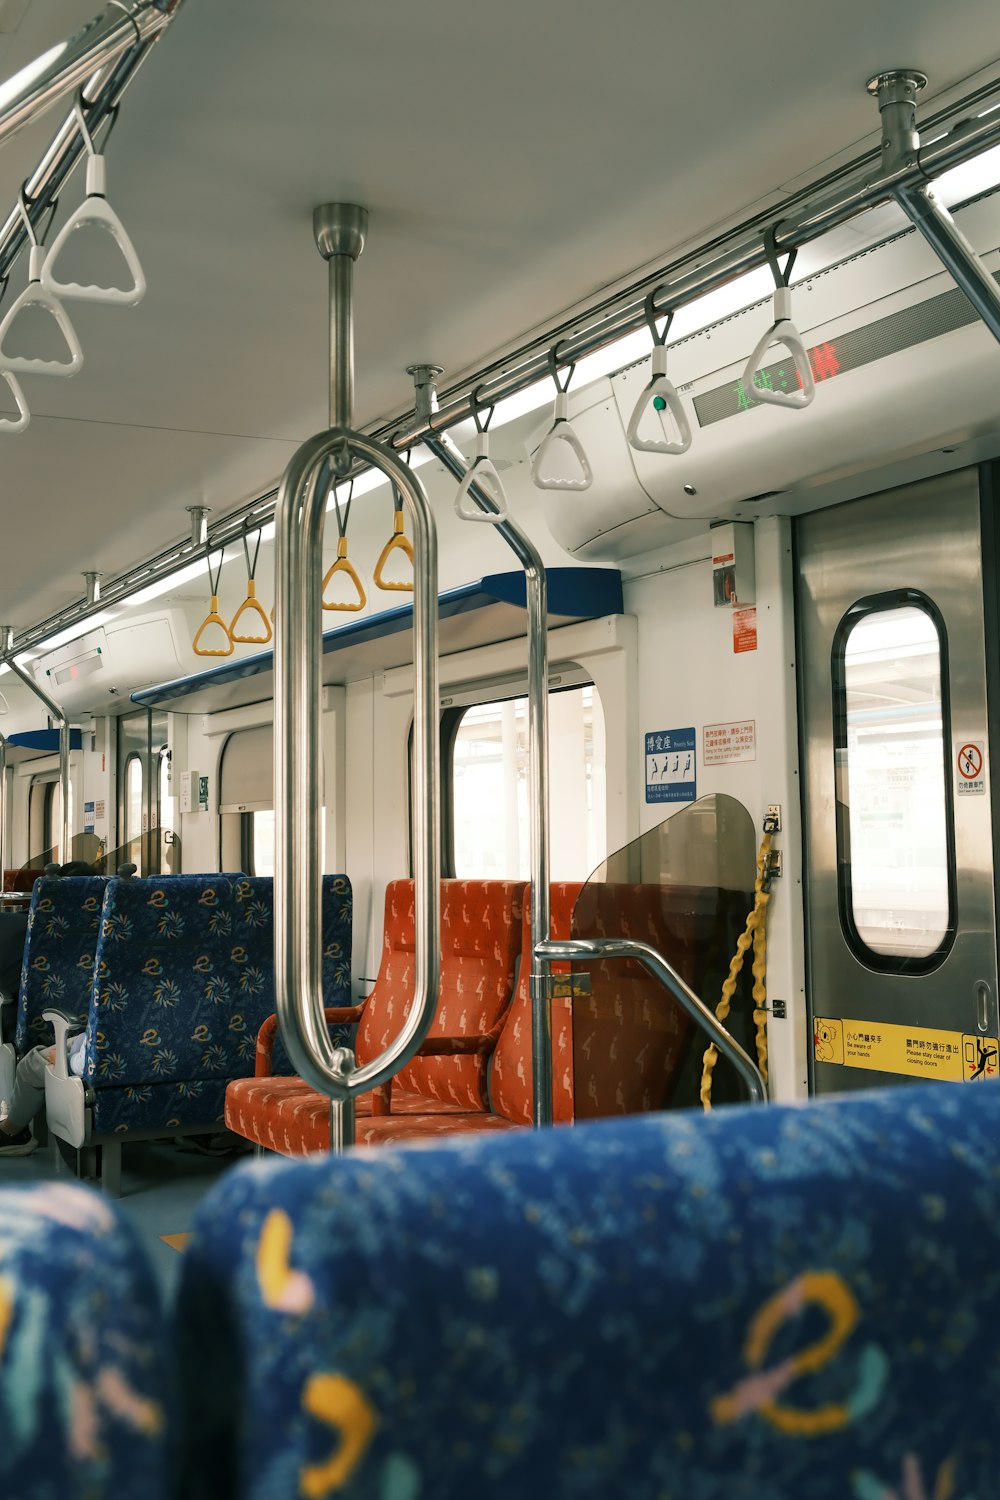 a view of the inside of a subway car